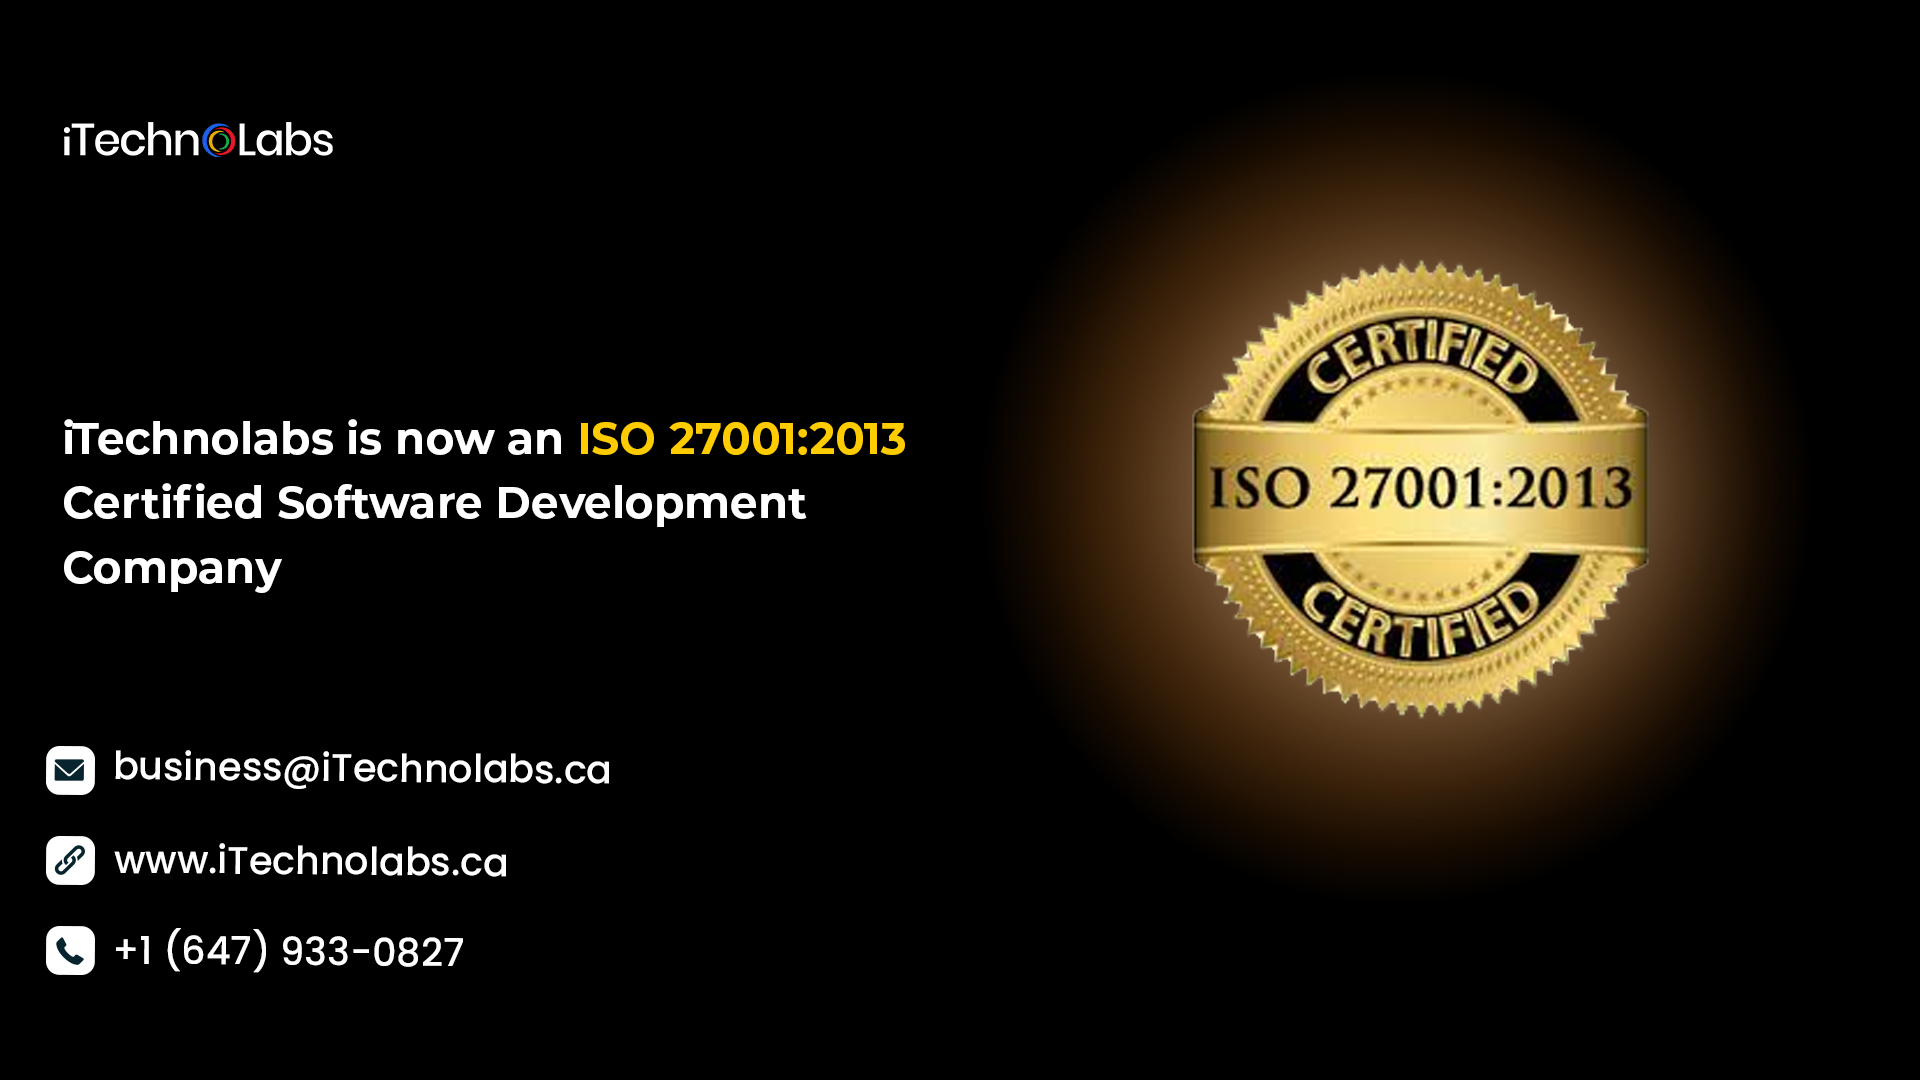 itechnolabs is now an iso 27001 2013 certified software development company